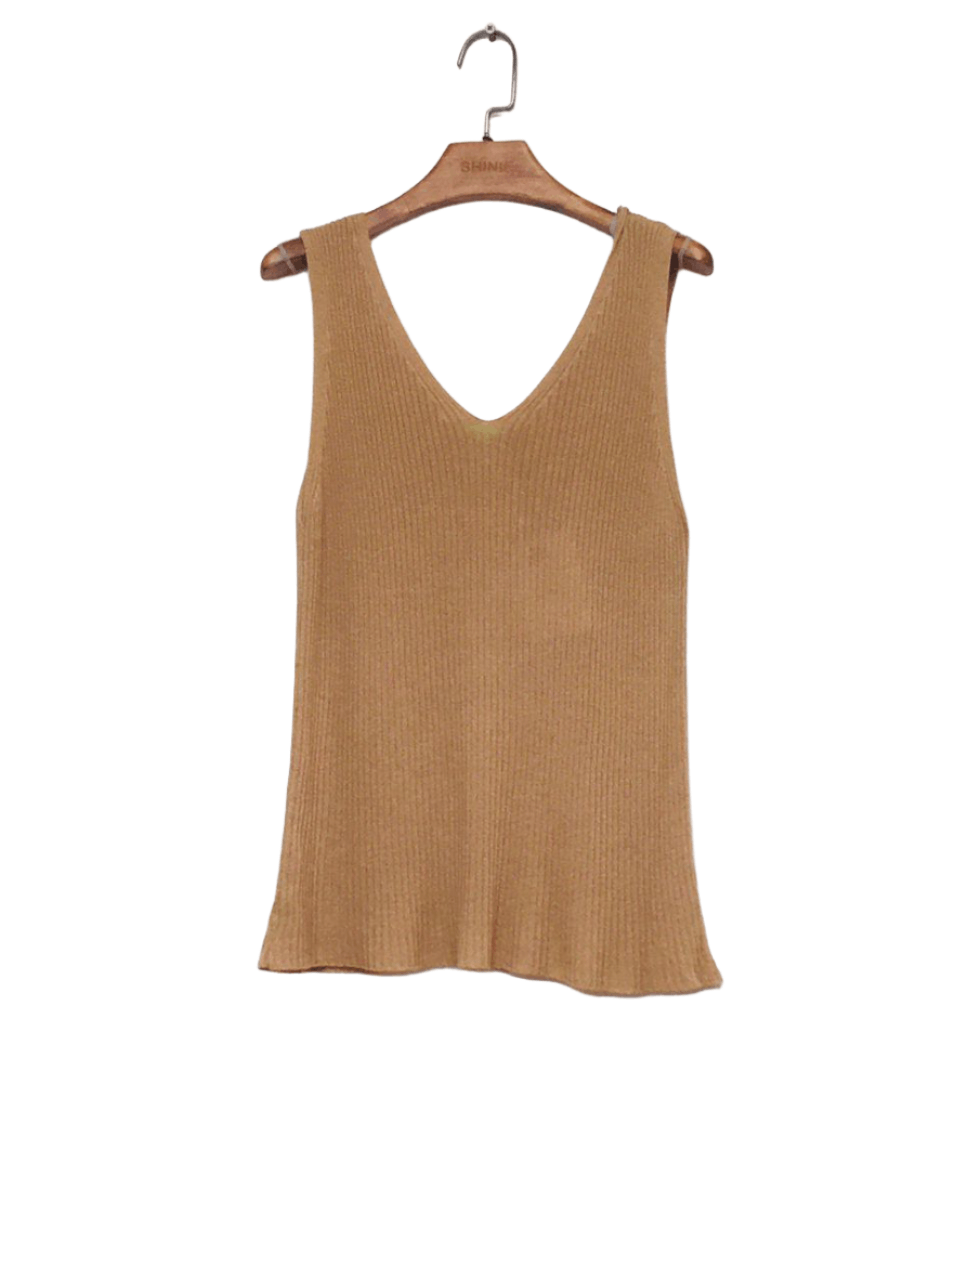 Clever Alice Linen Tank in Camel 